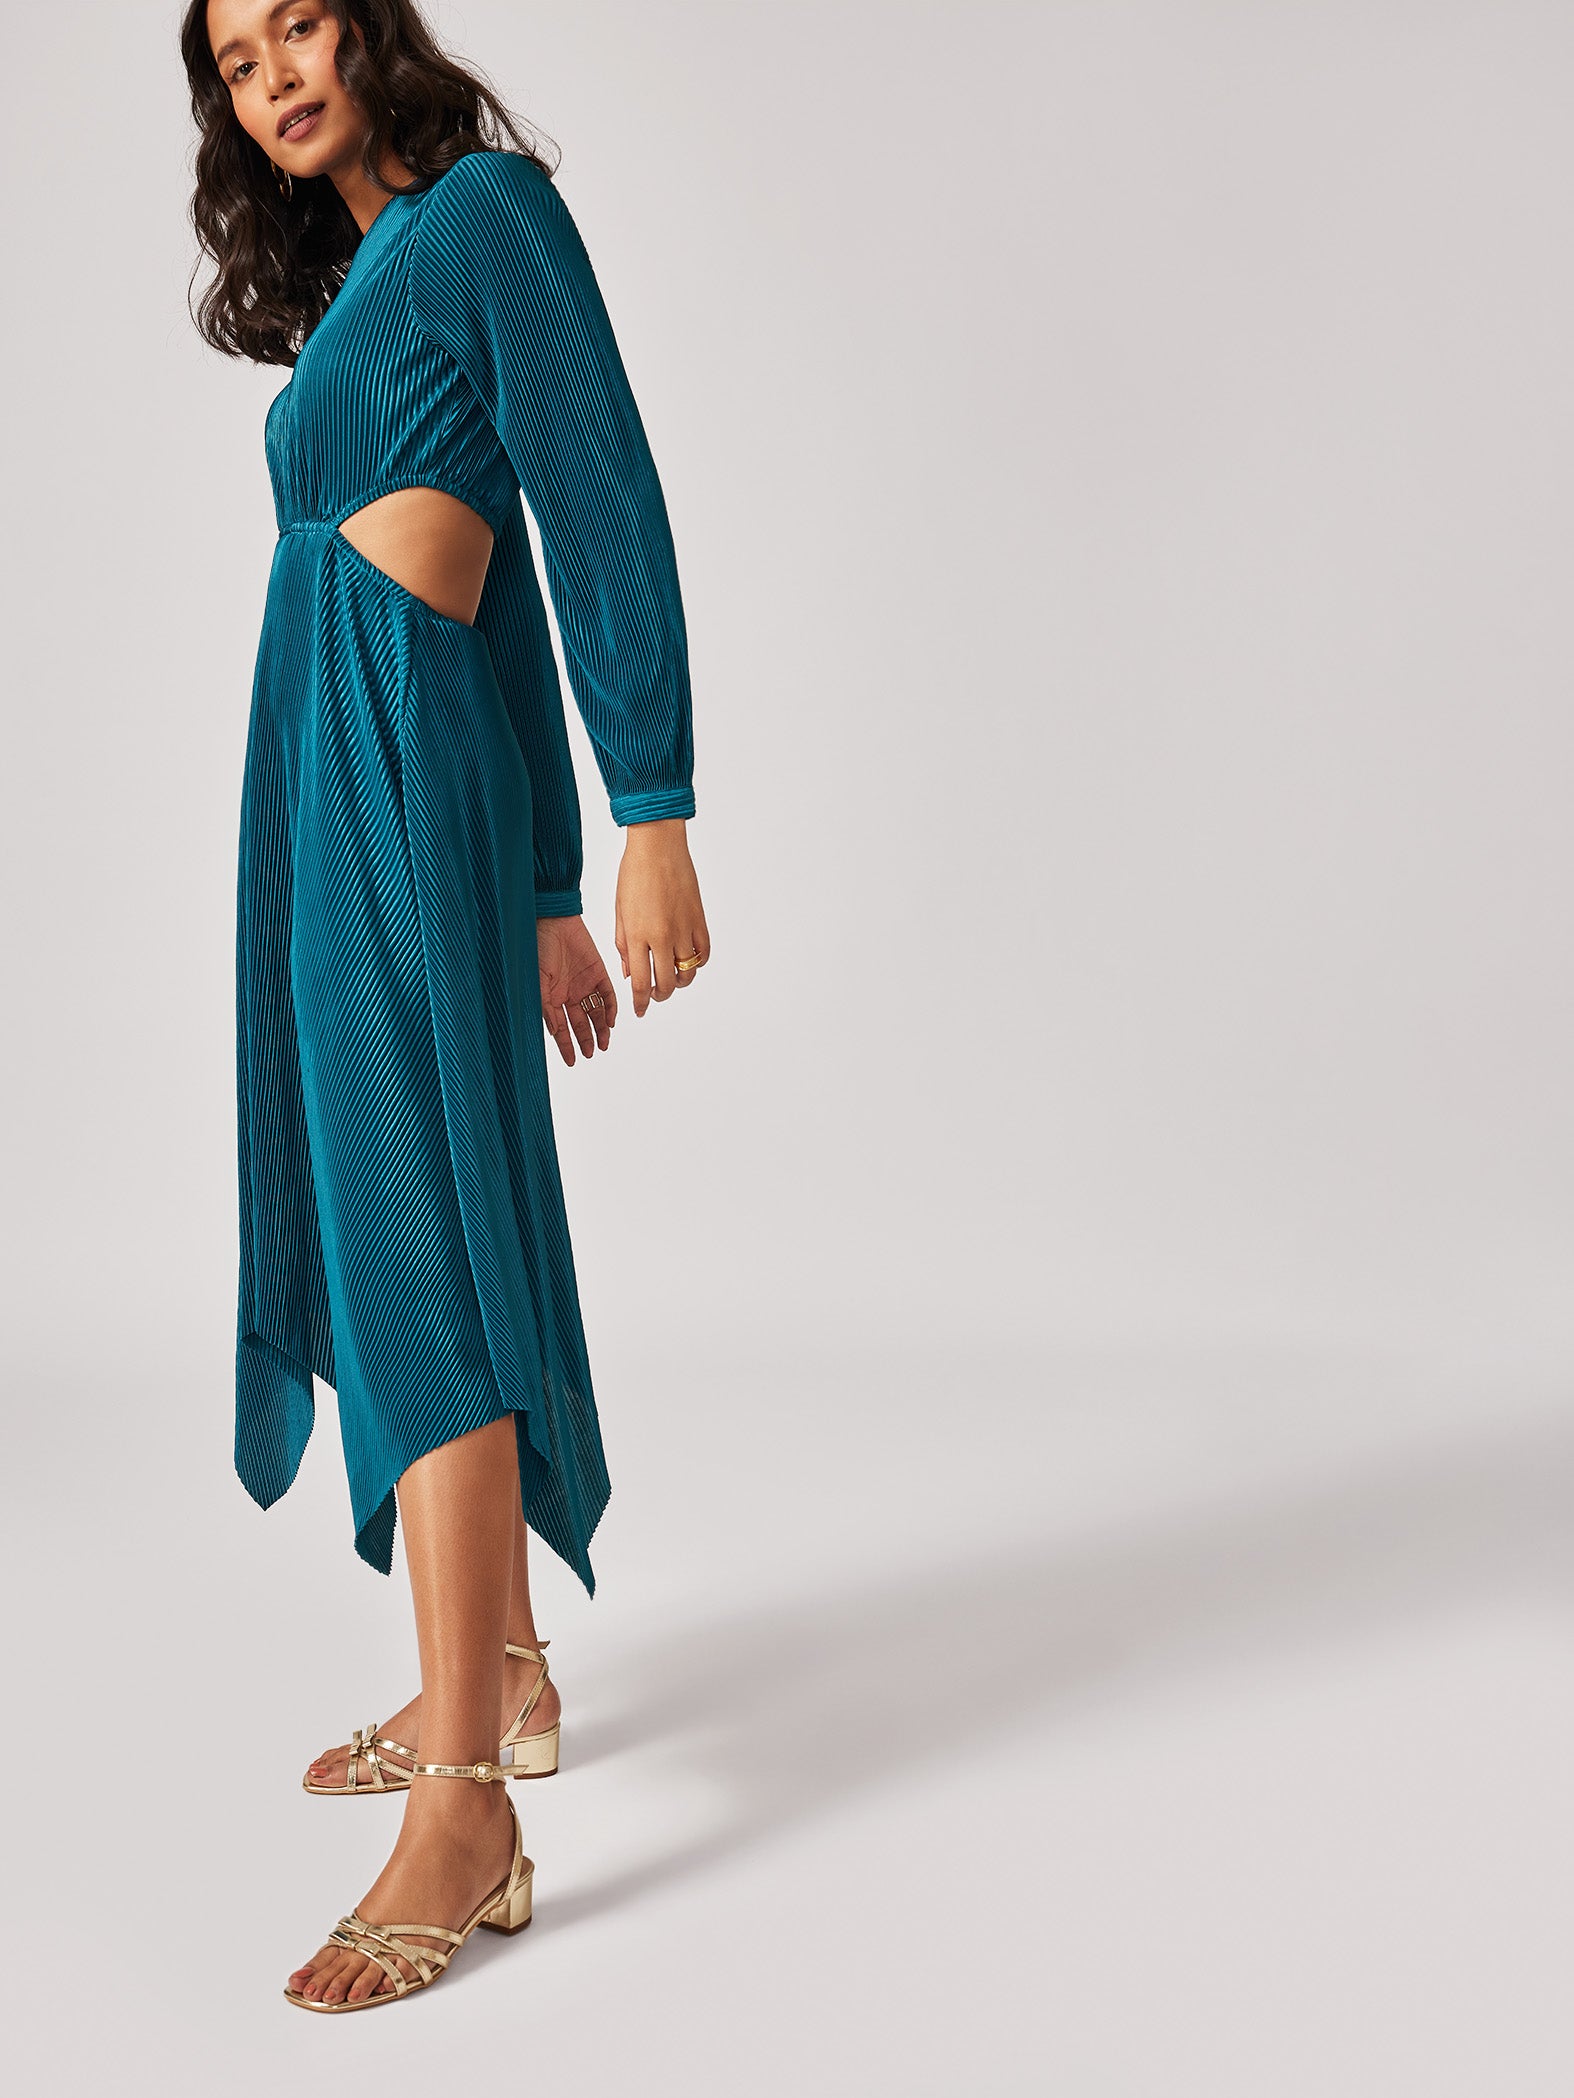 Teal Pleated Cut Out Dress